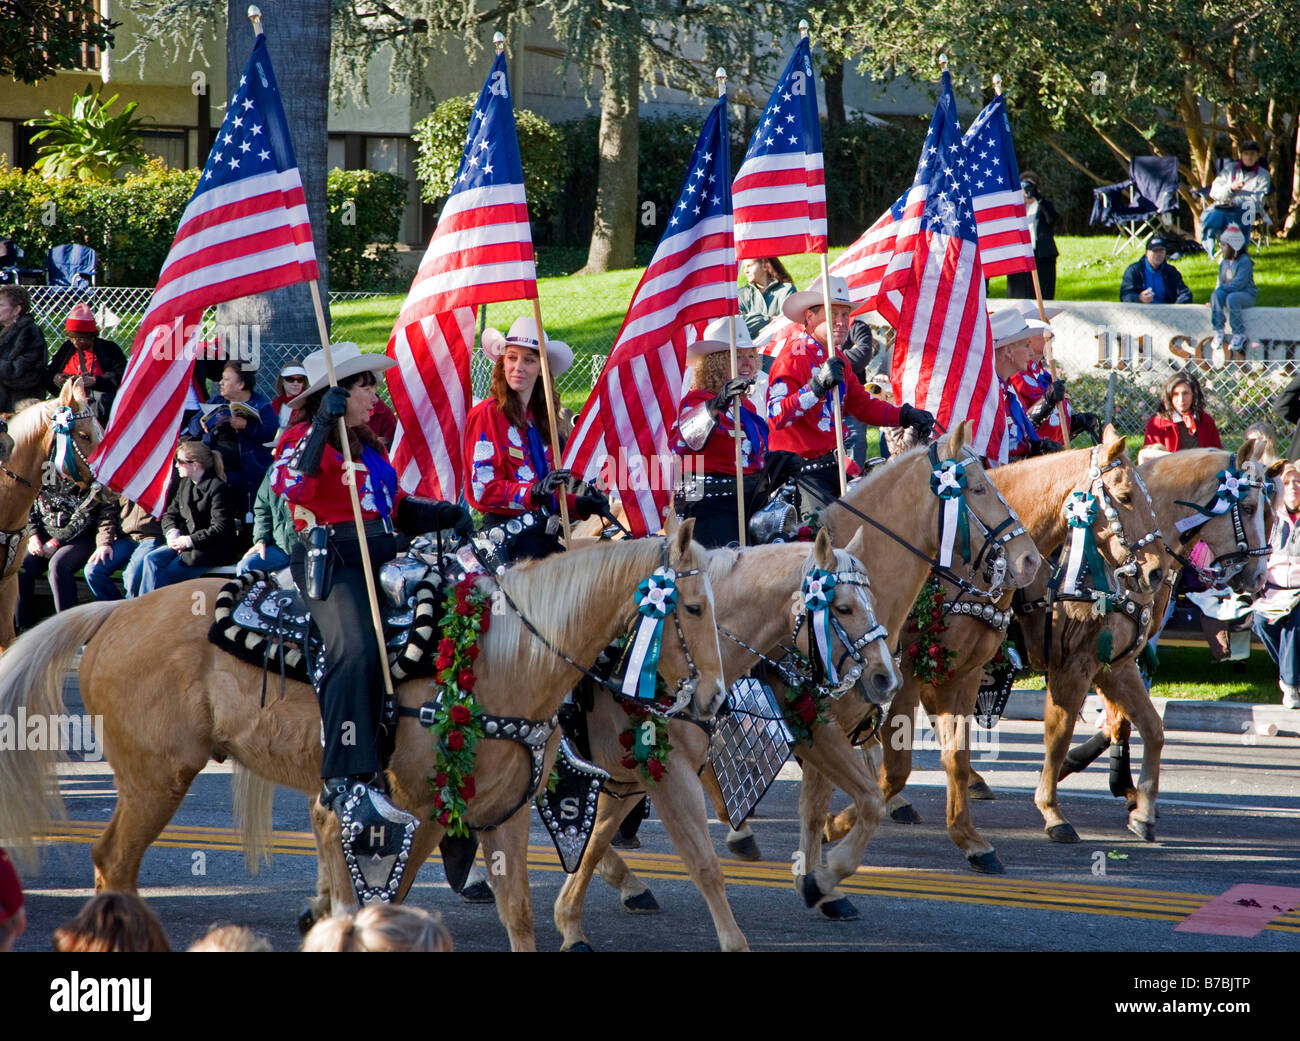 Horseback riders with American Flags in the annual New Years Day Rose Bowl Parade, Pasadena, California, USA Stock Photo